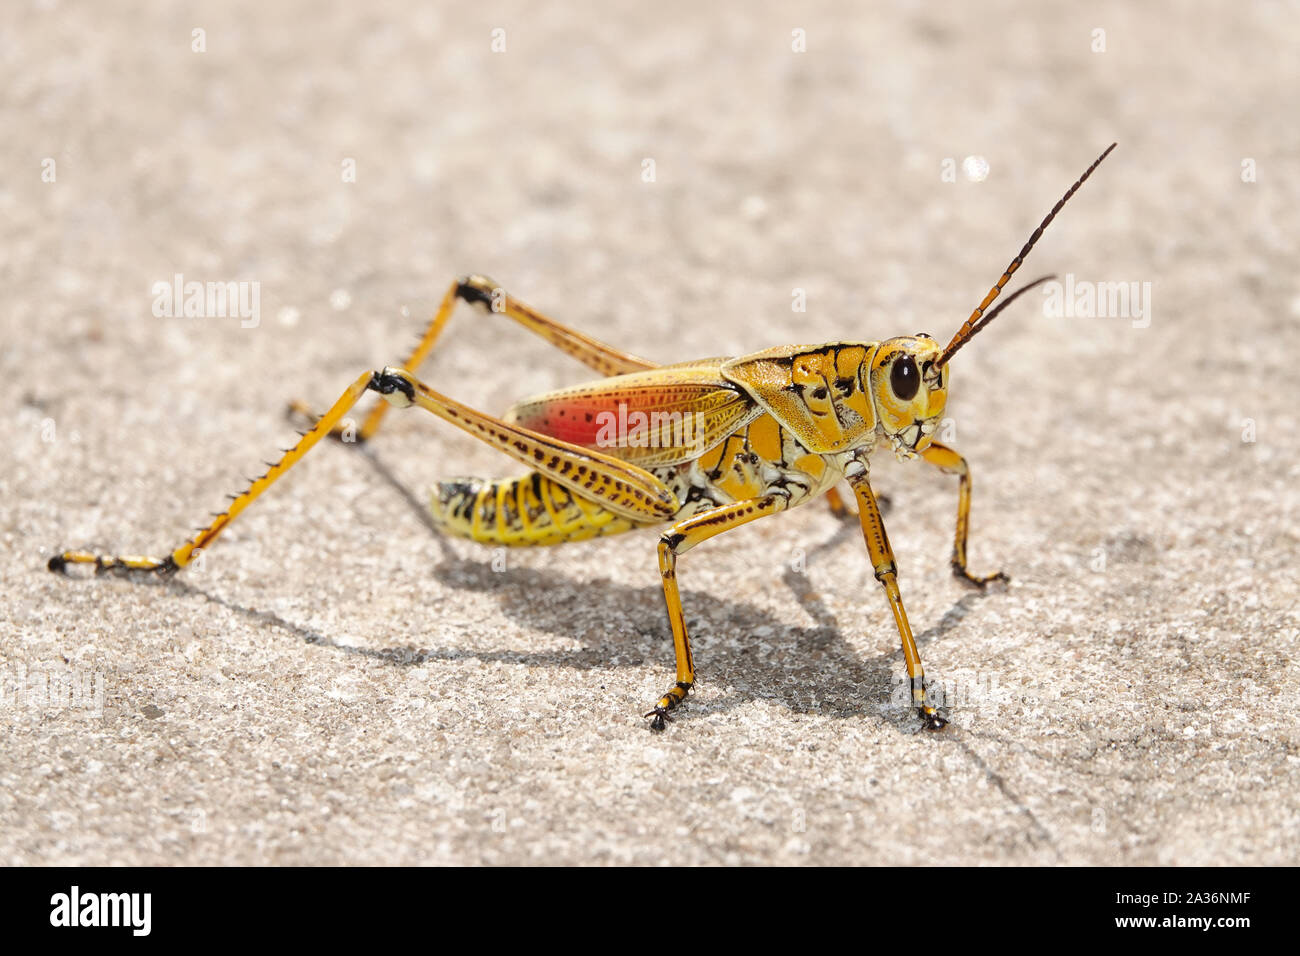 Romalea microptera, commonly known as eastern lubber grasshopper or Florida lubber grasshopper Stock Photo